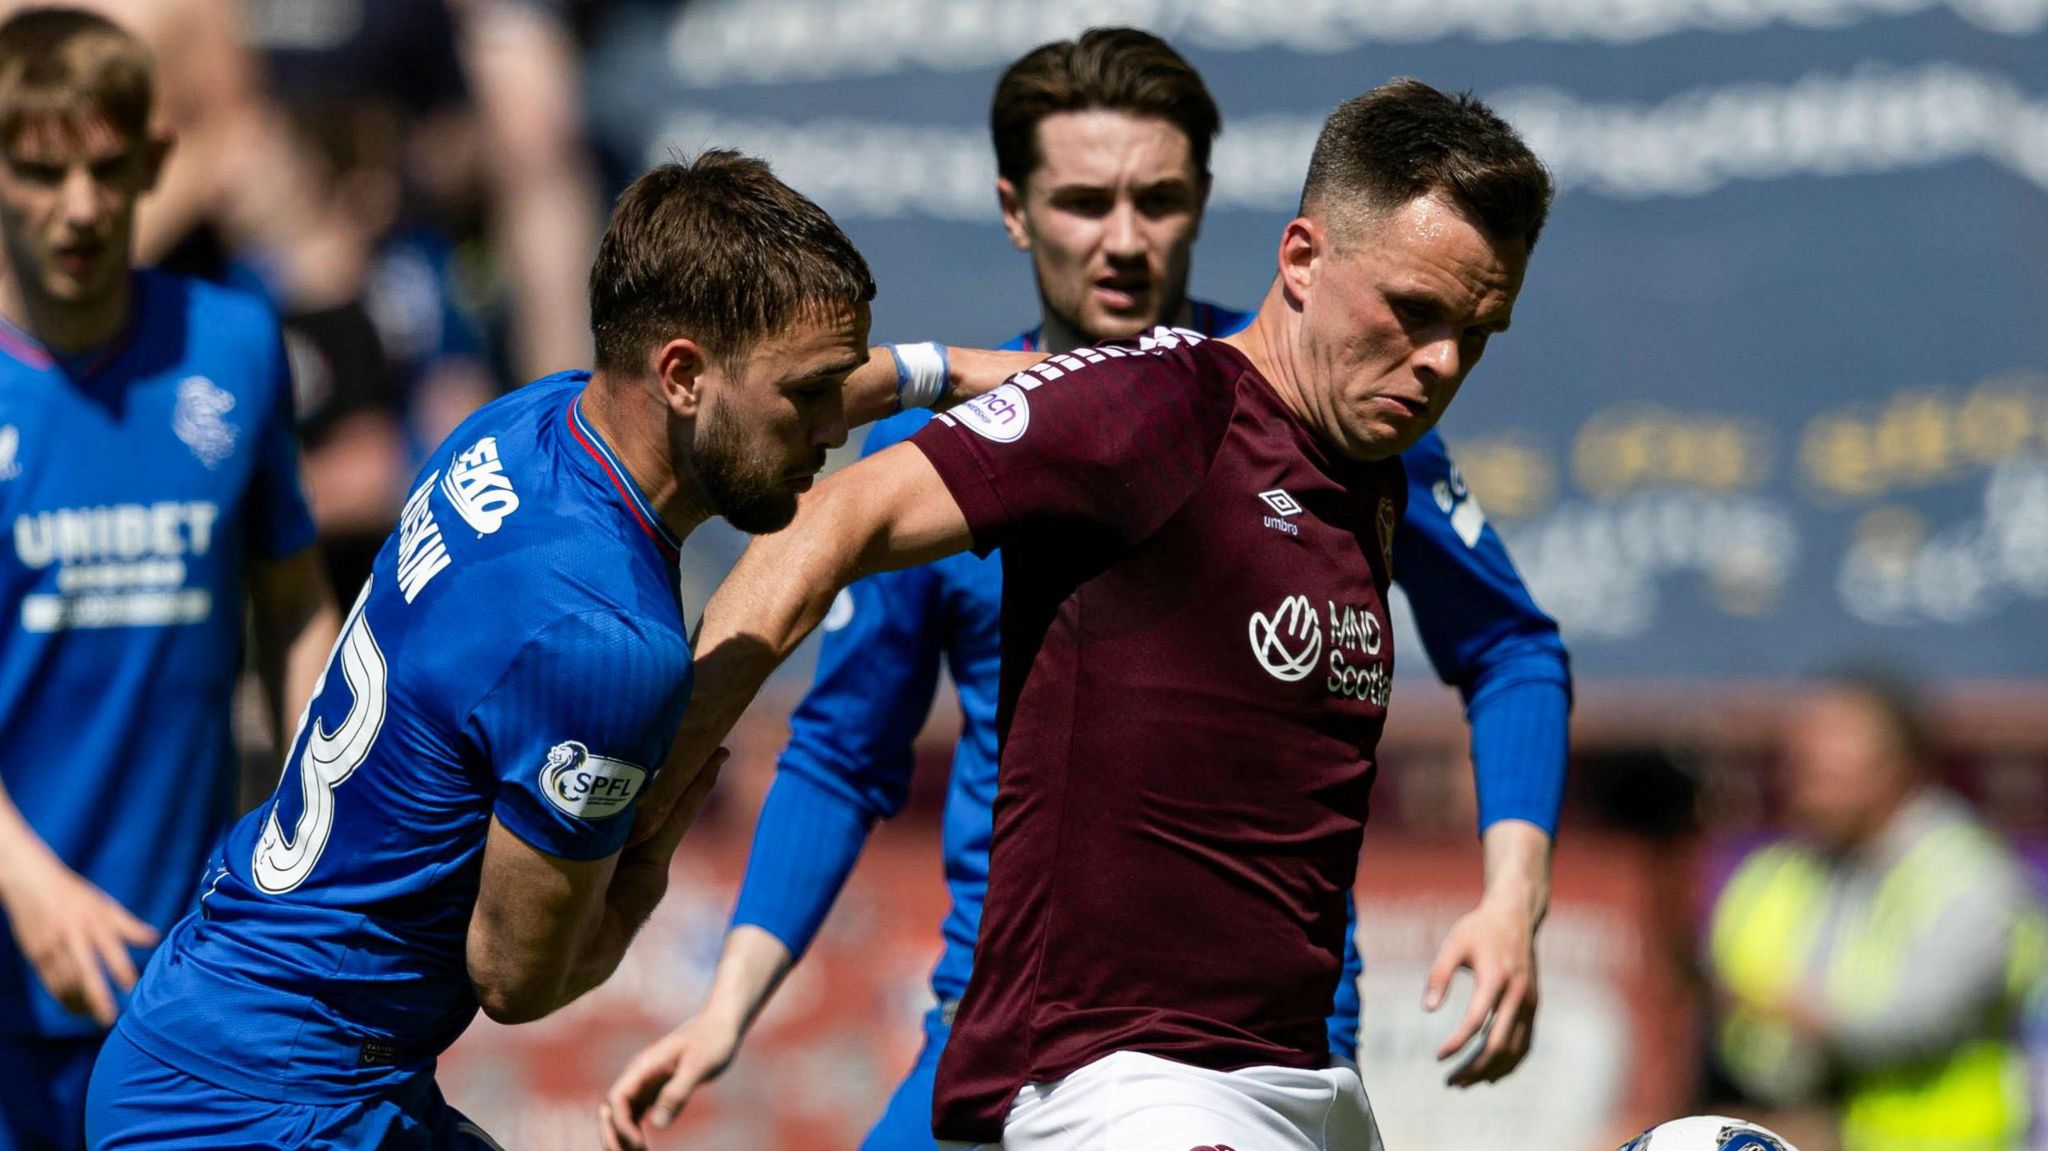 Hearts' Lawrence Shankland and Rangers' Nicolas Raskin in action during a cinch Premiership match between Heart of Midlothian and Rangers at Tynecastle Park